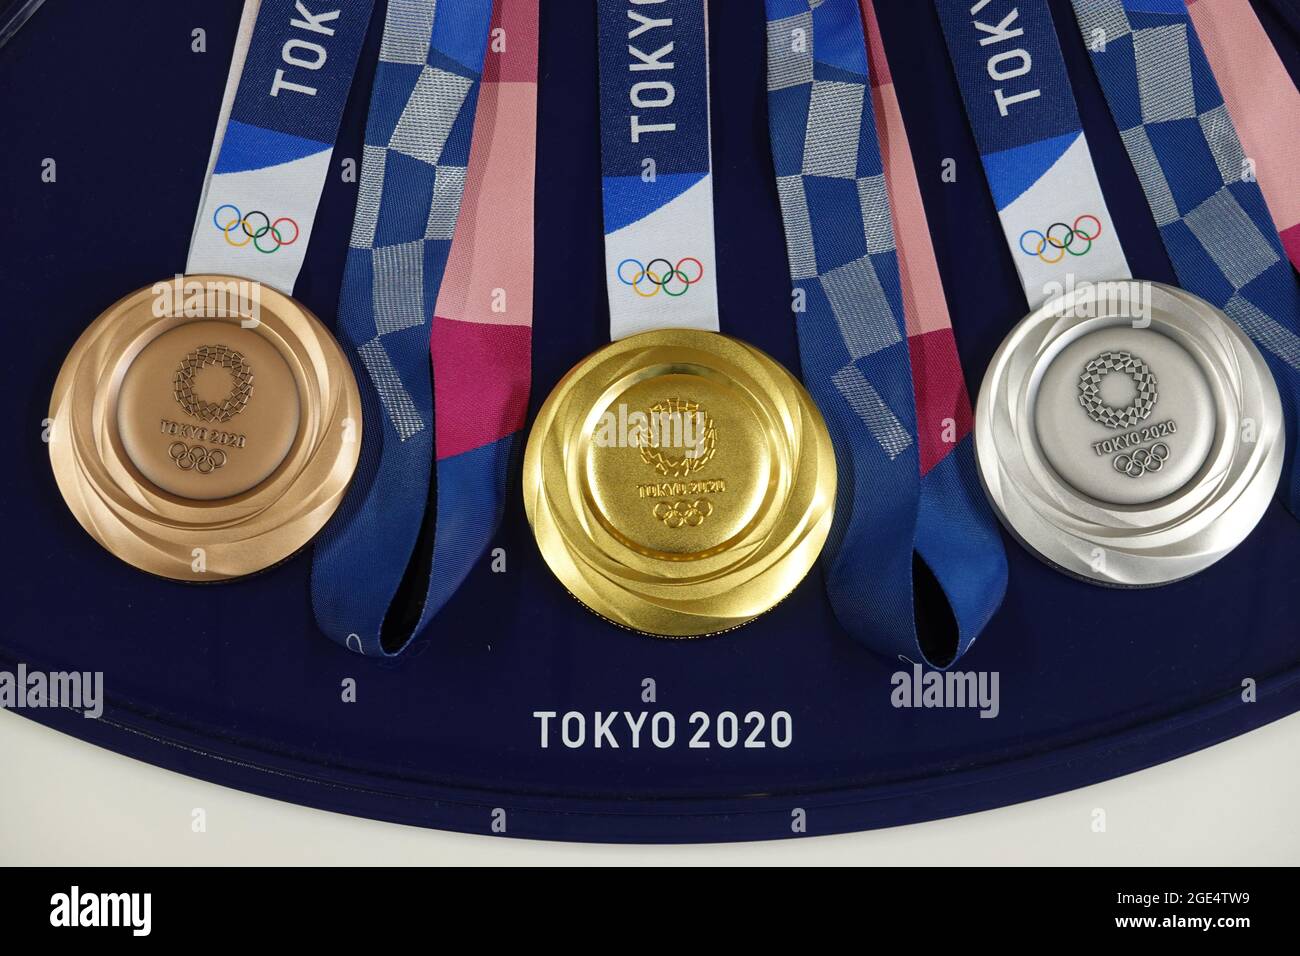 Tokyo 2020 Olympic gold, silver and bronze medals on a tray before a medal presentation Stock Photo